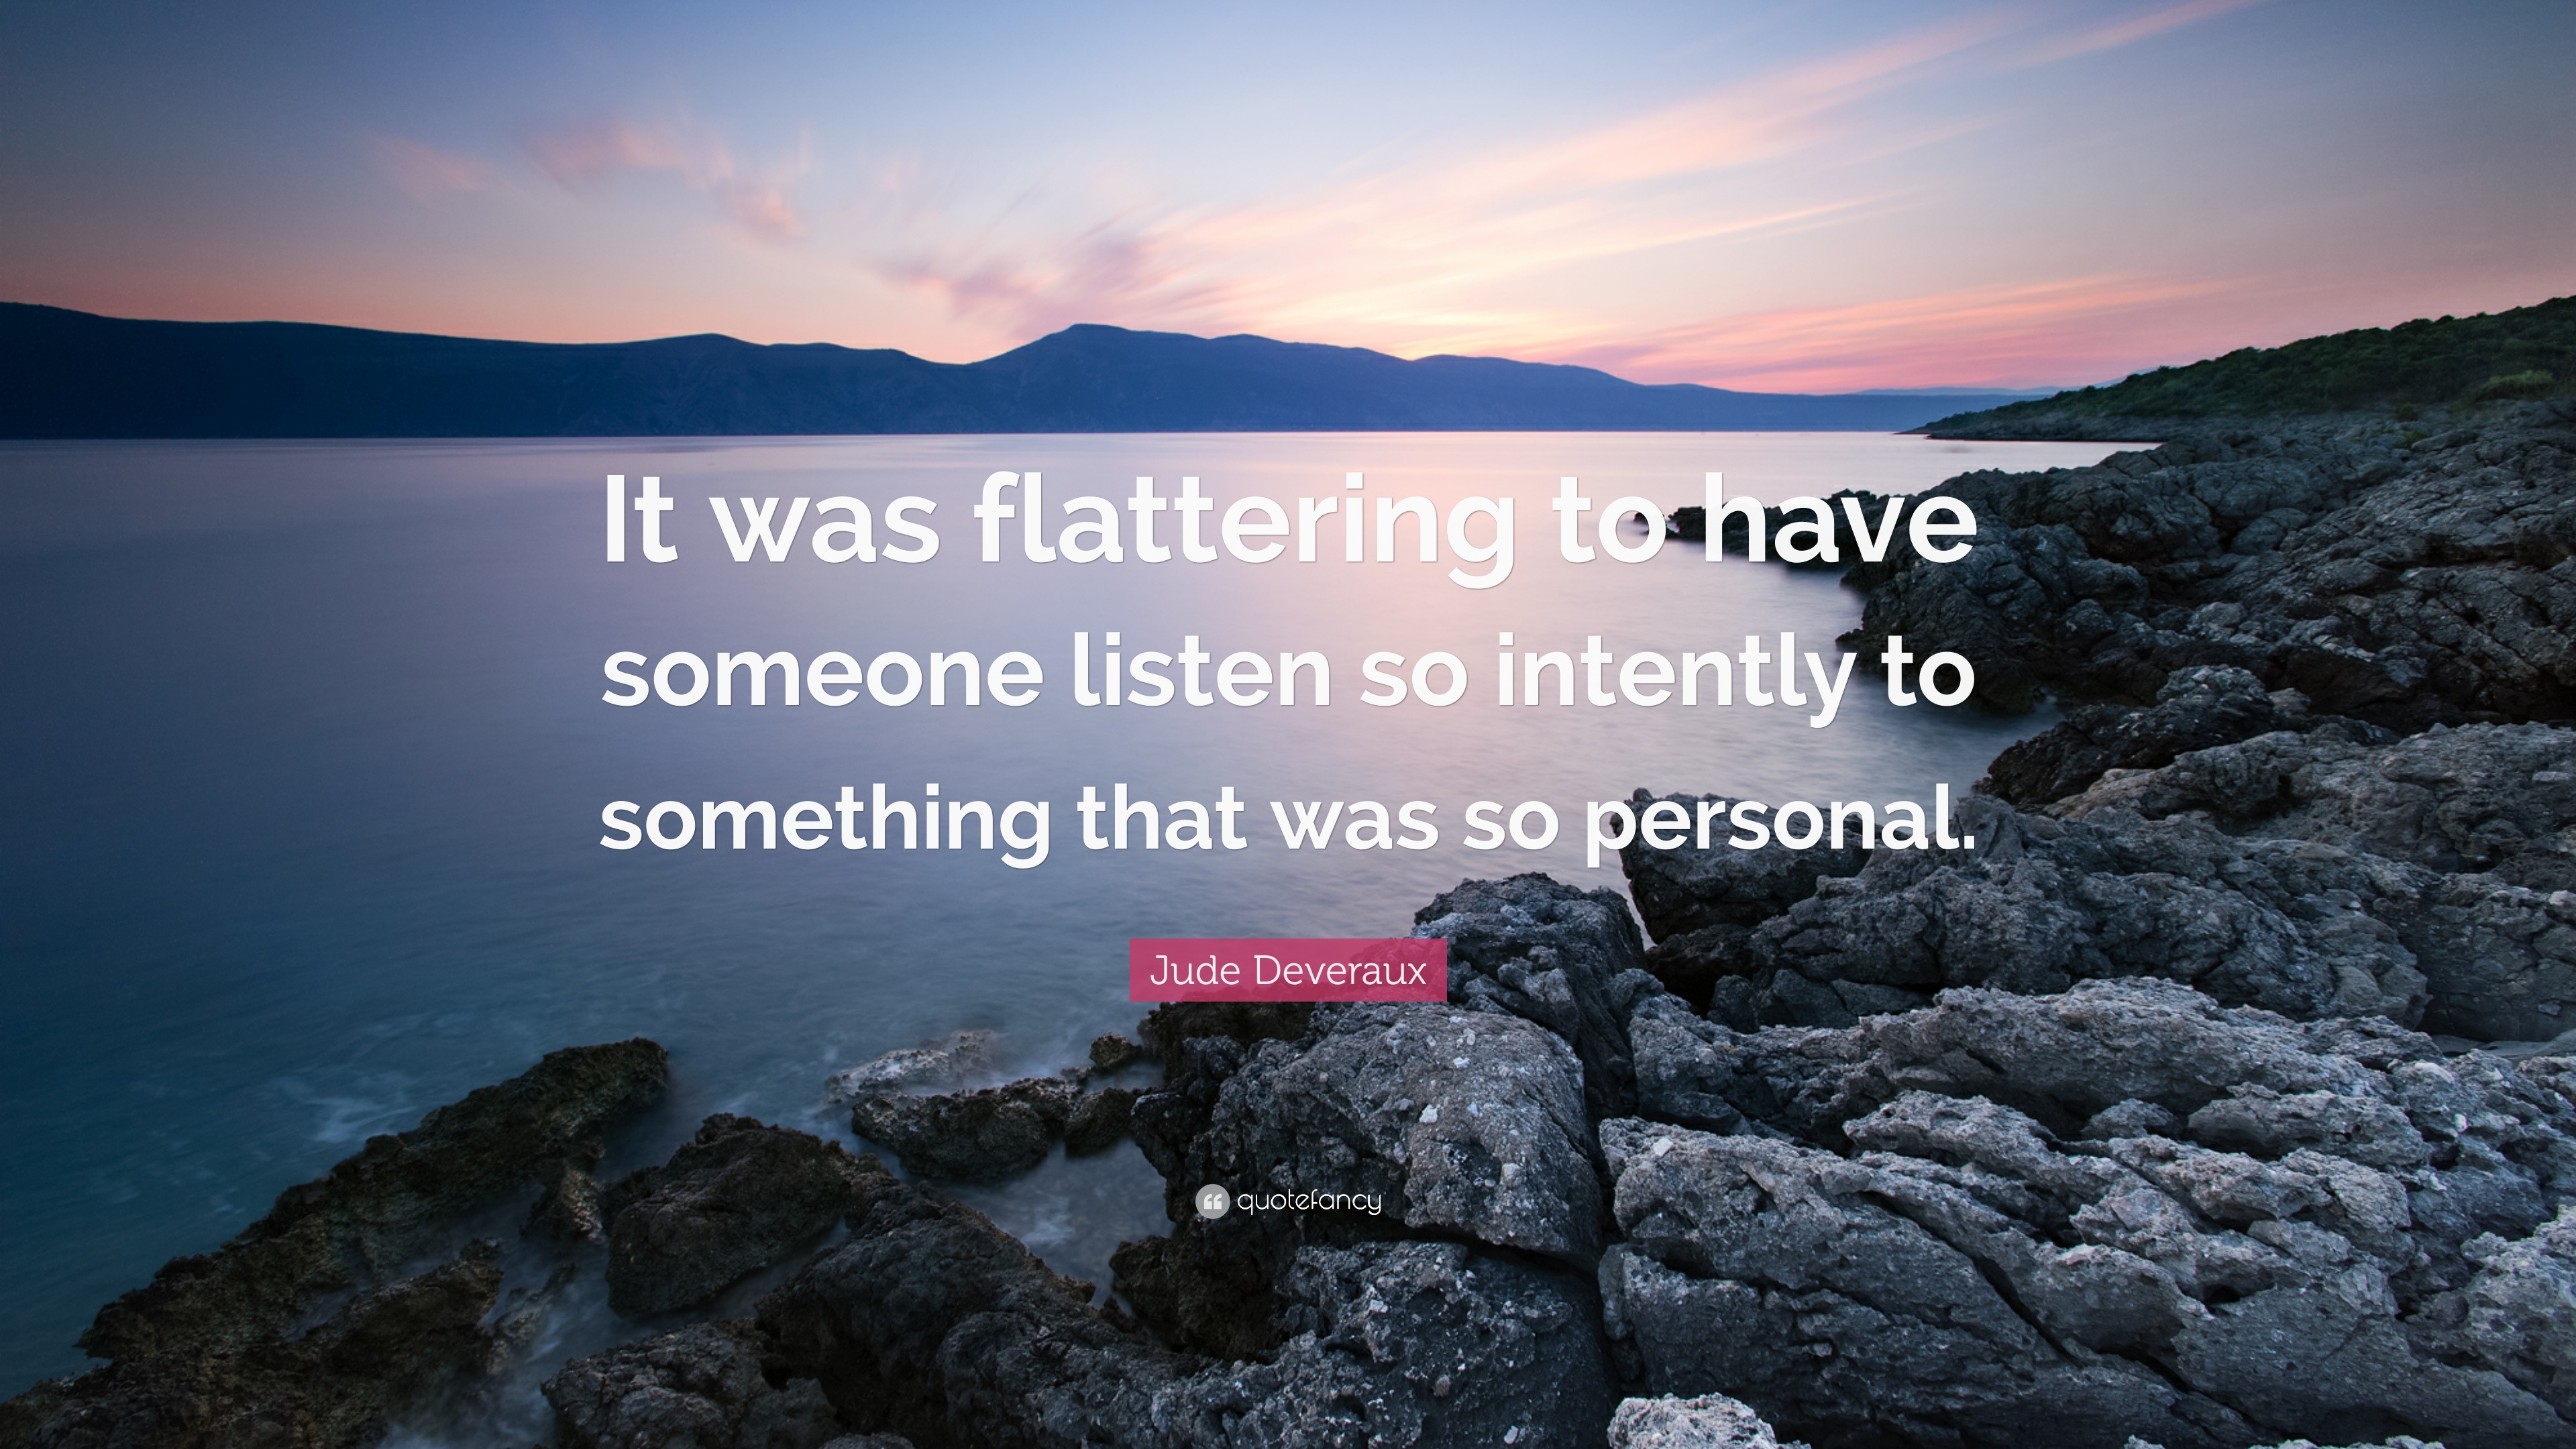 Jude Deveraux Quote: “It was flattering to have someone listen so ...